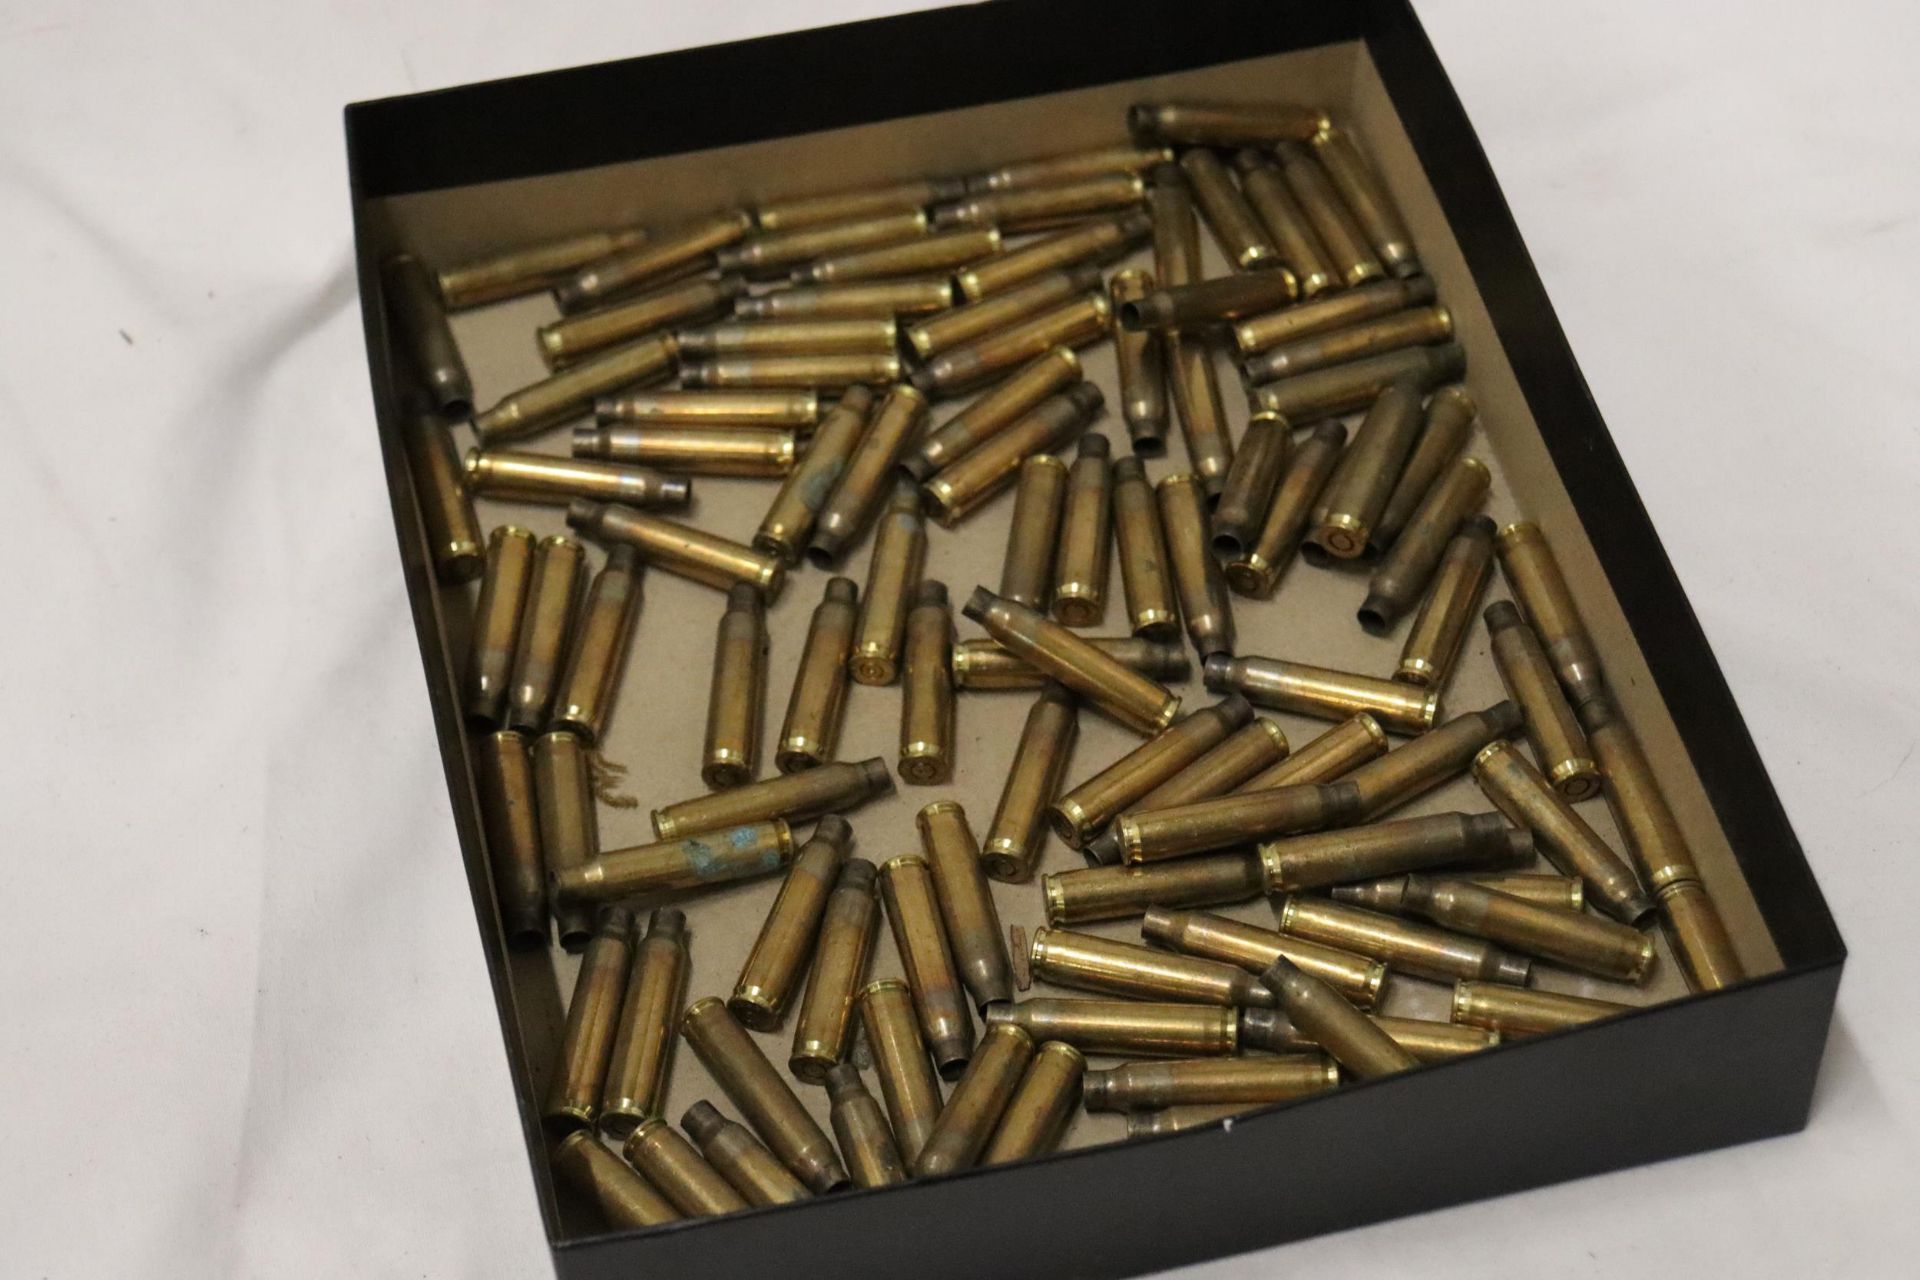 A QUANTITY OF OVER 100 BRASS BULLET CASINGS